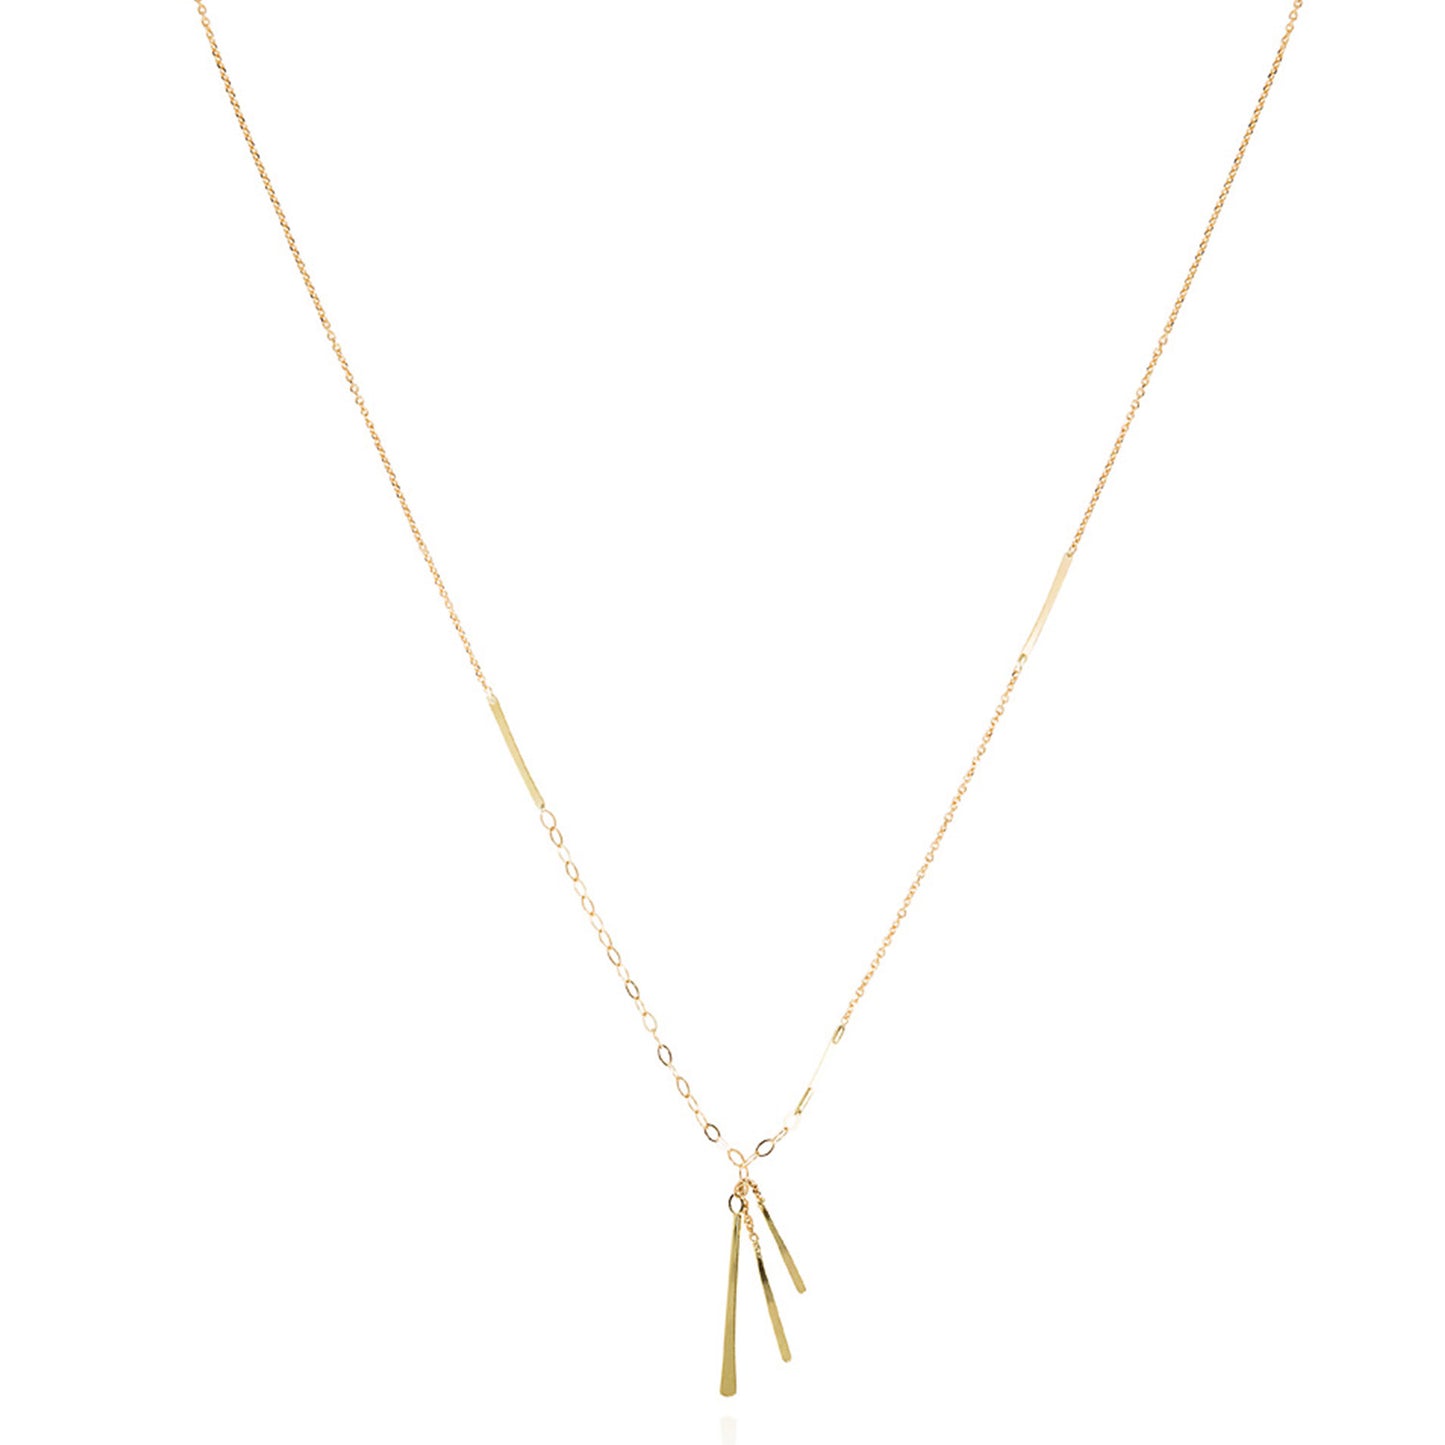 18ct gold fine and oval chain necklace with 3 inserted bars and 3 hanging bars